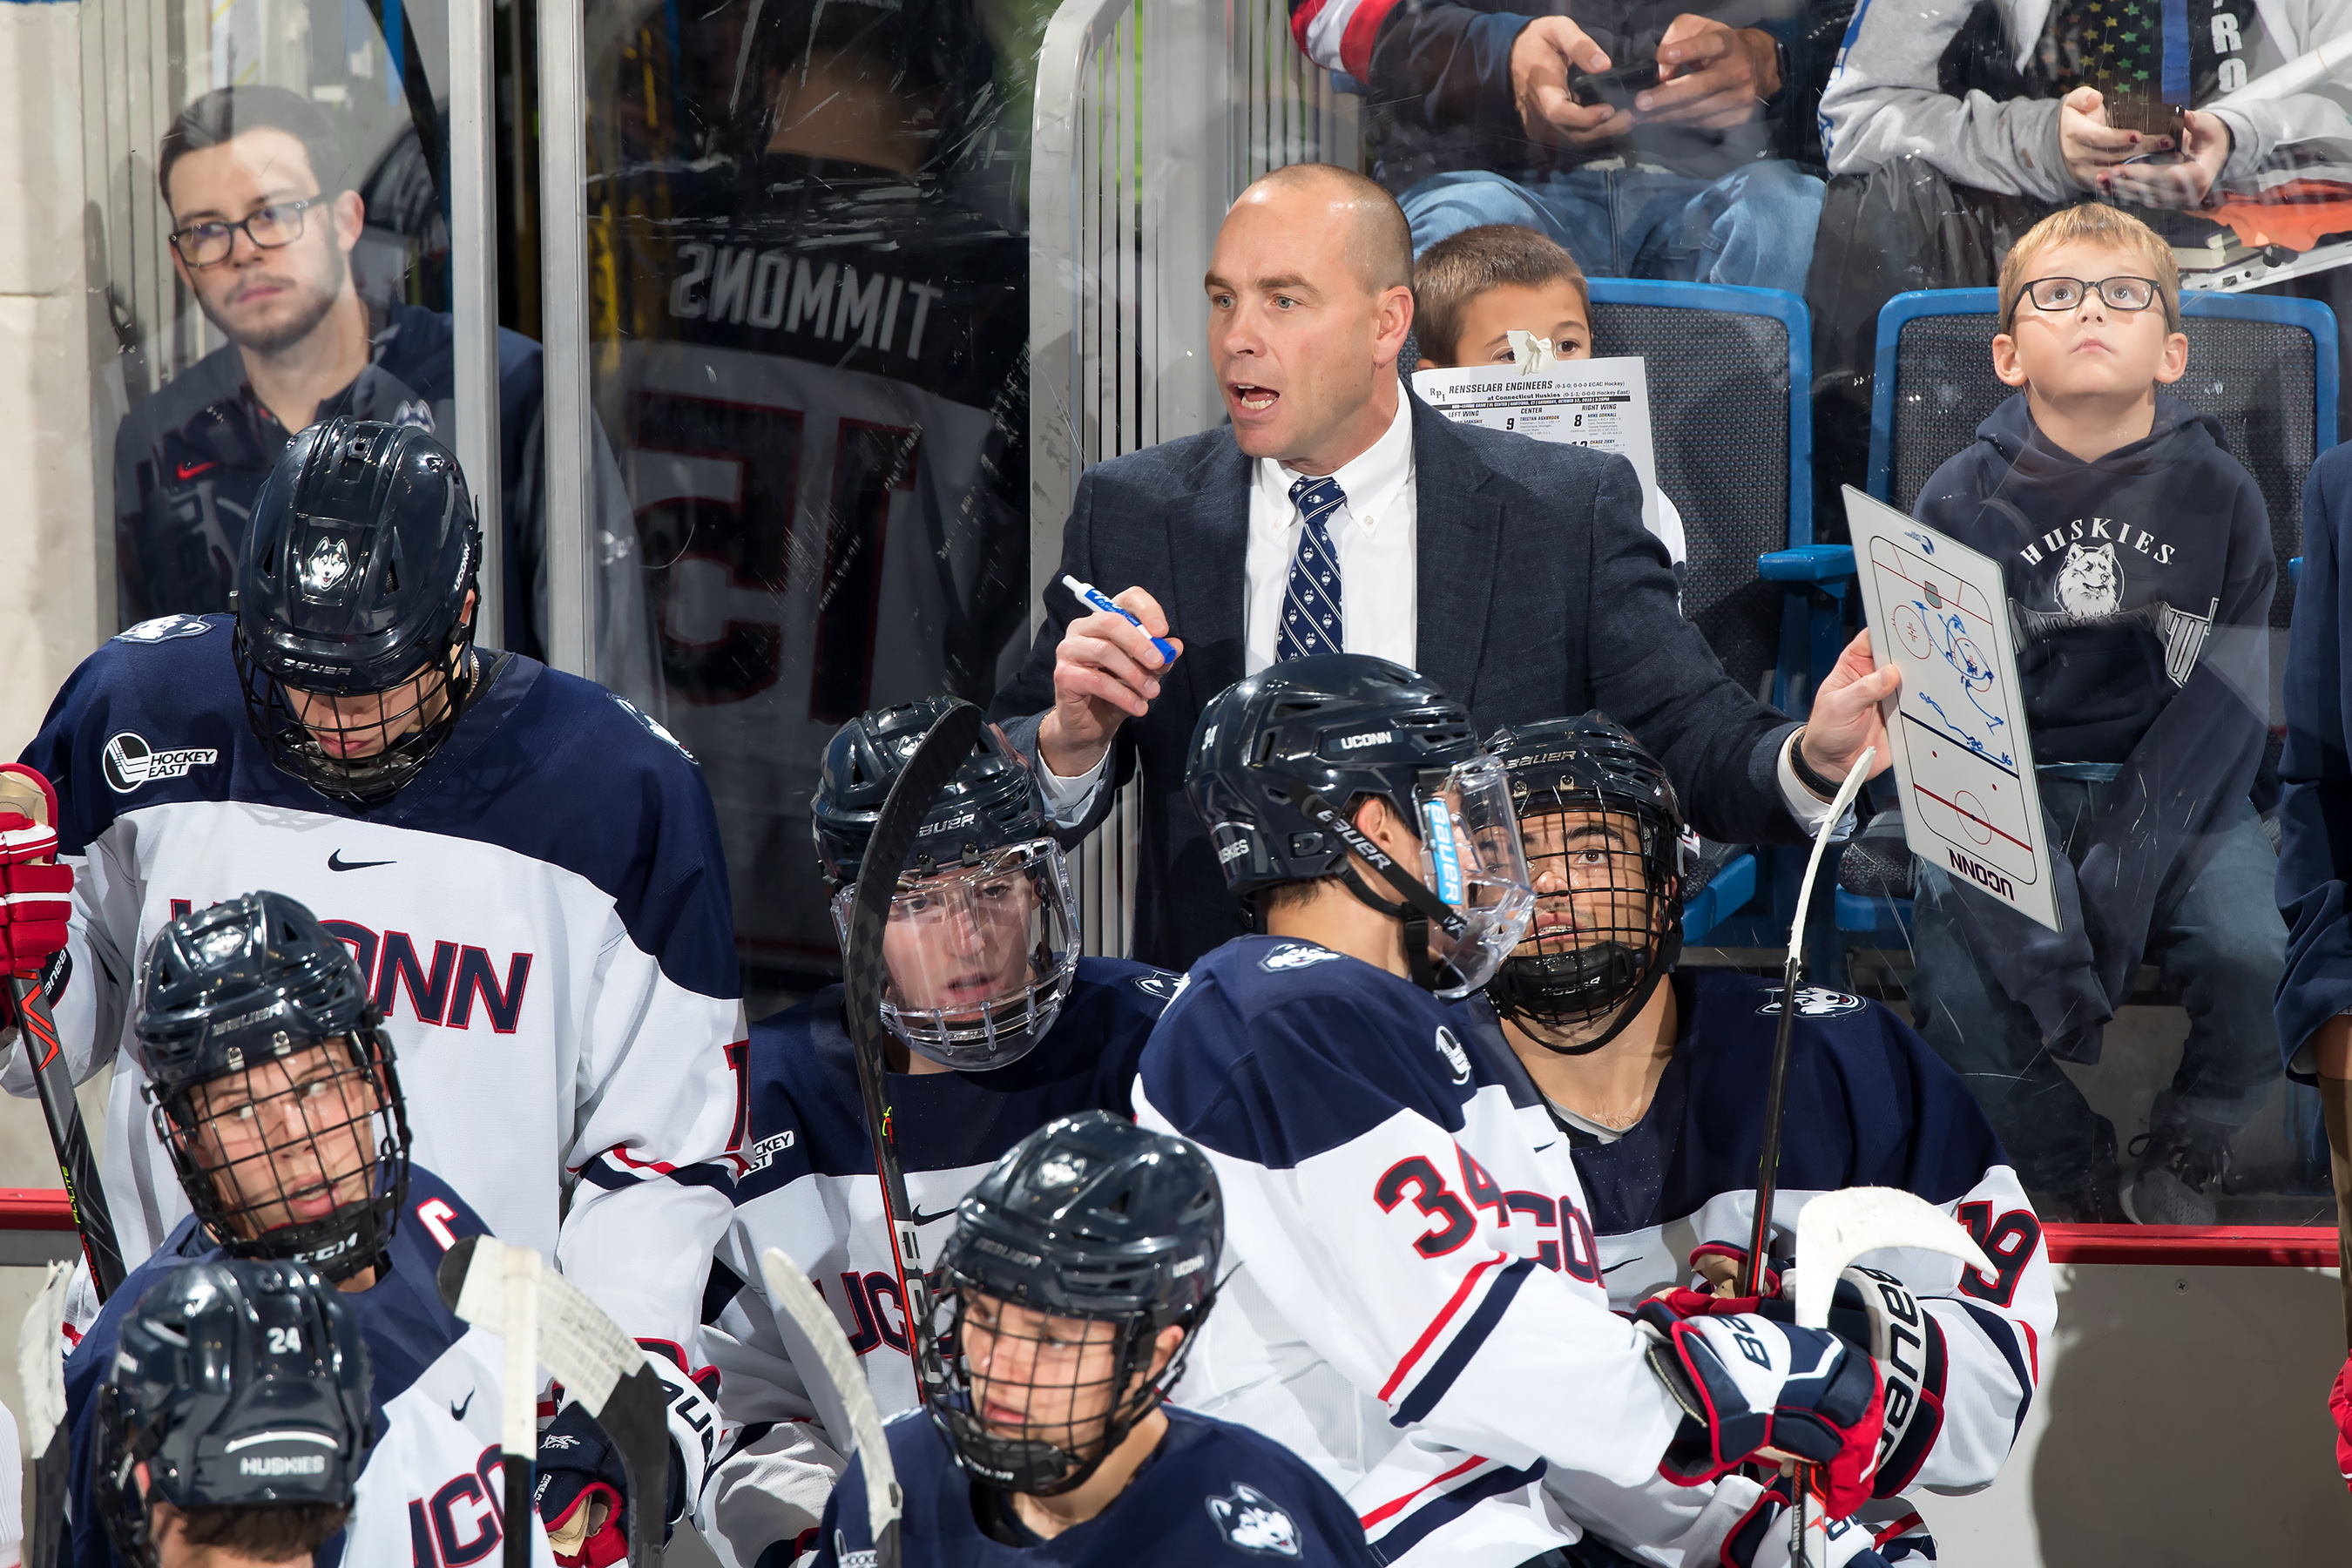 UConn men's ice hockey Coach Mike Cavanaugh on the bench during a game.